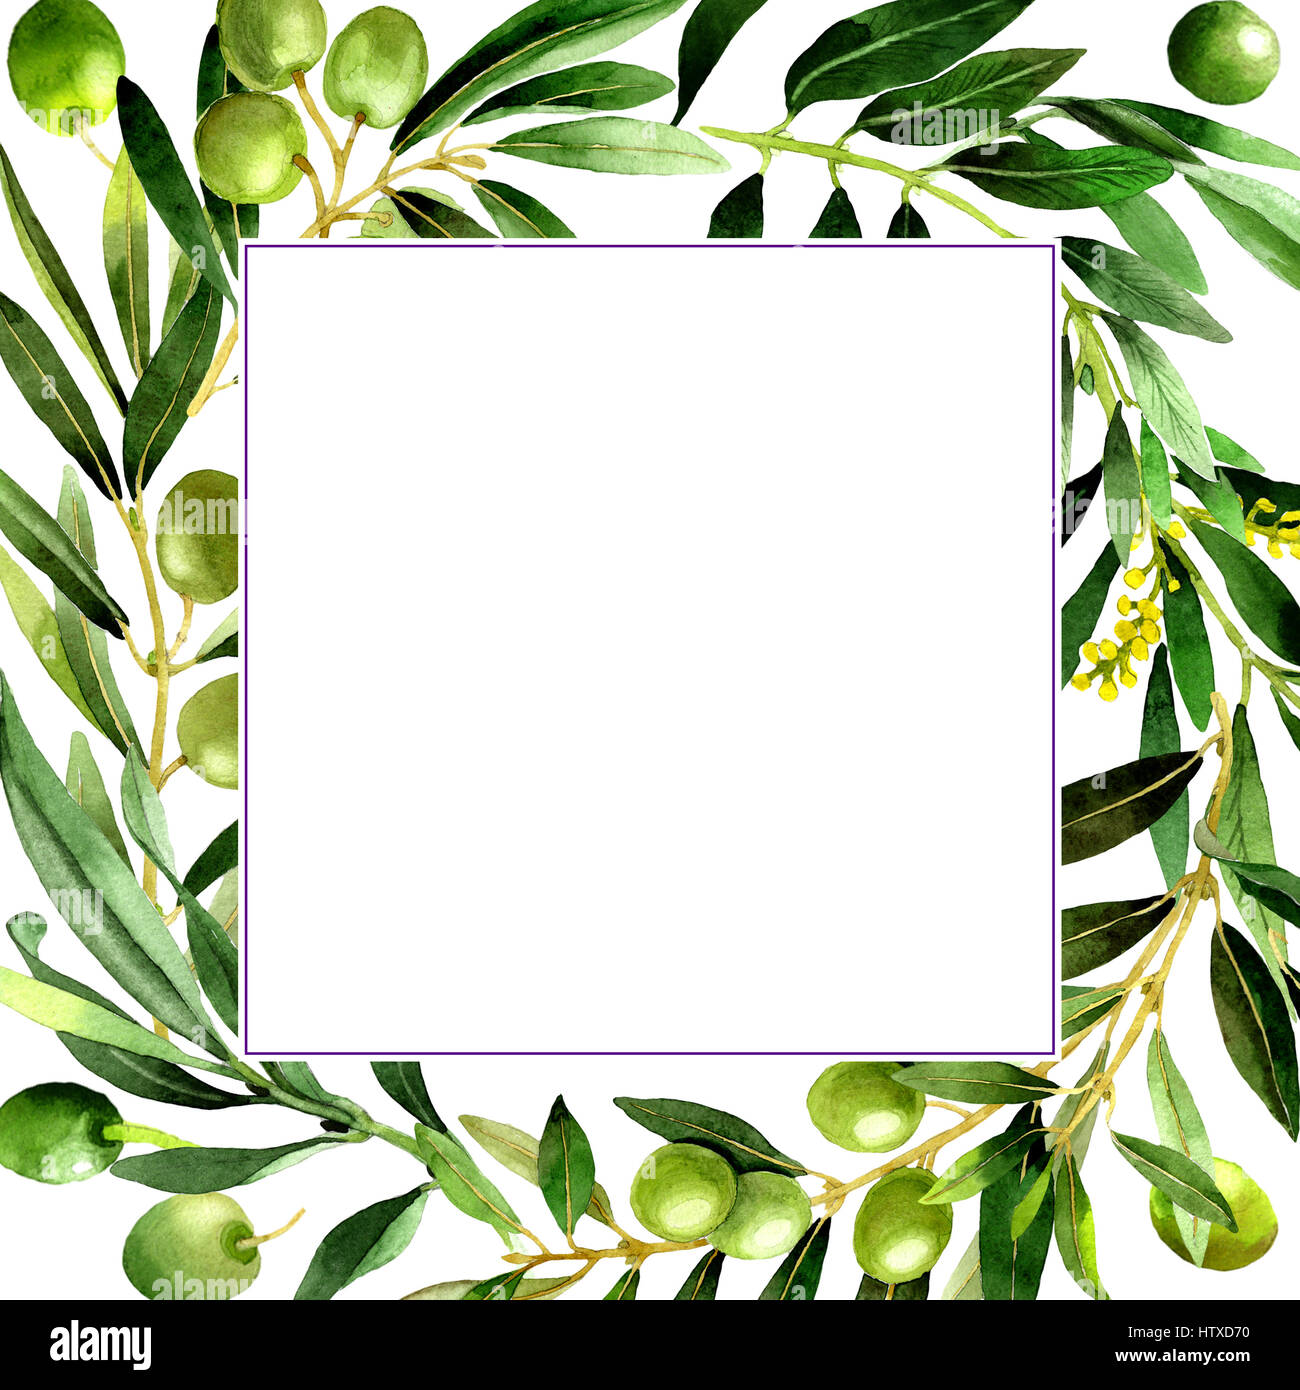 Olive tree frame in a watercolor style isolated Stock Photo - Alamy